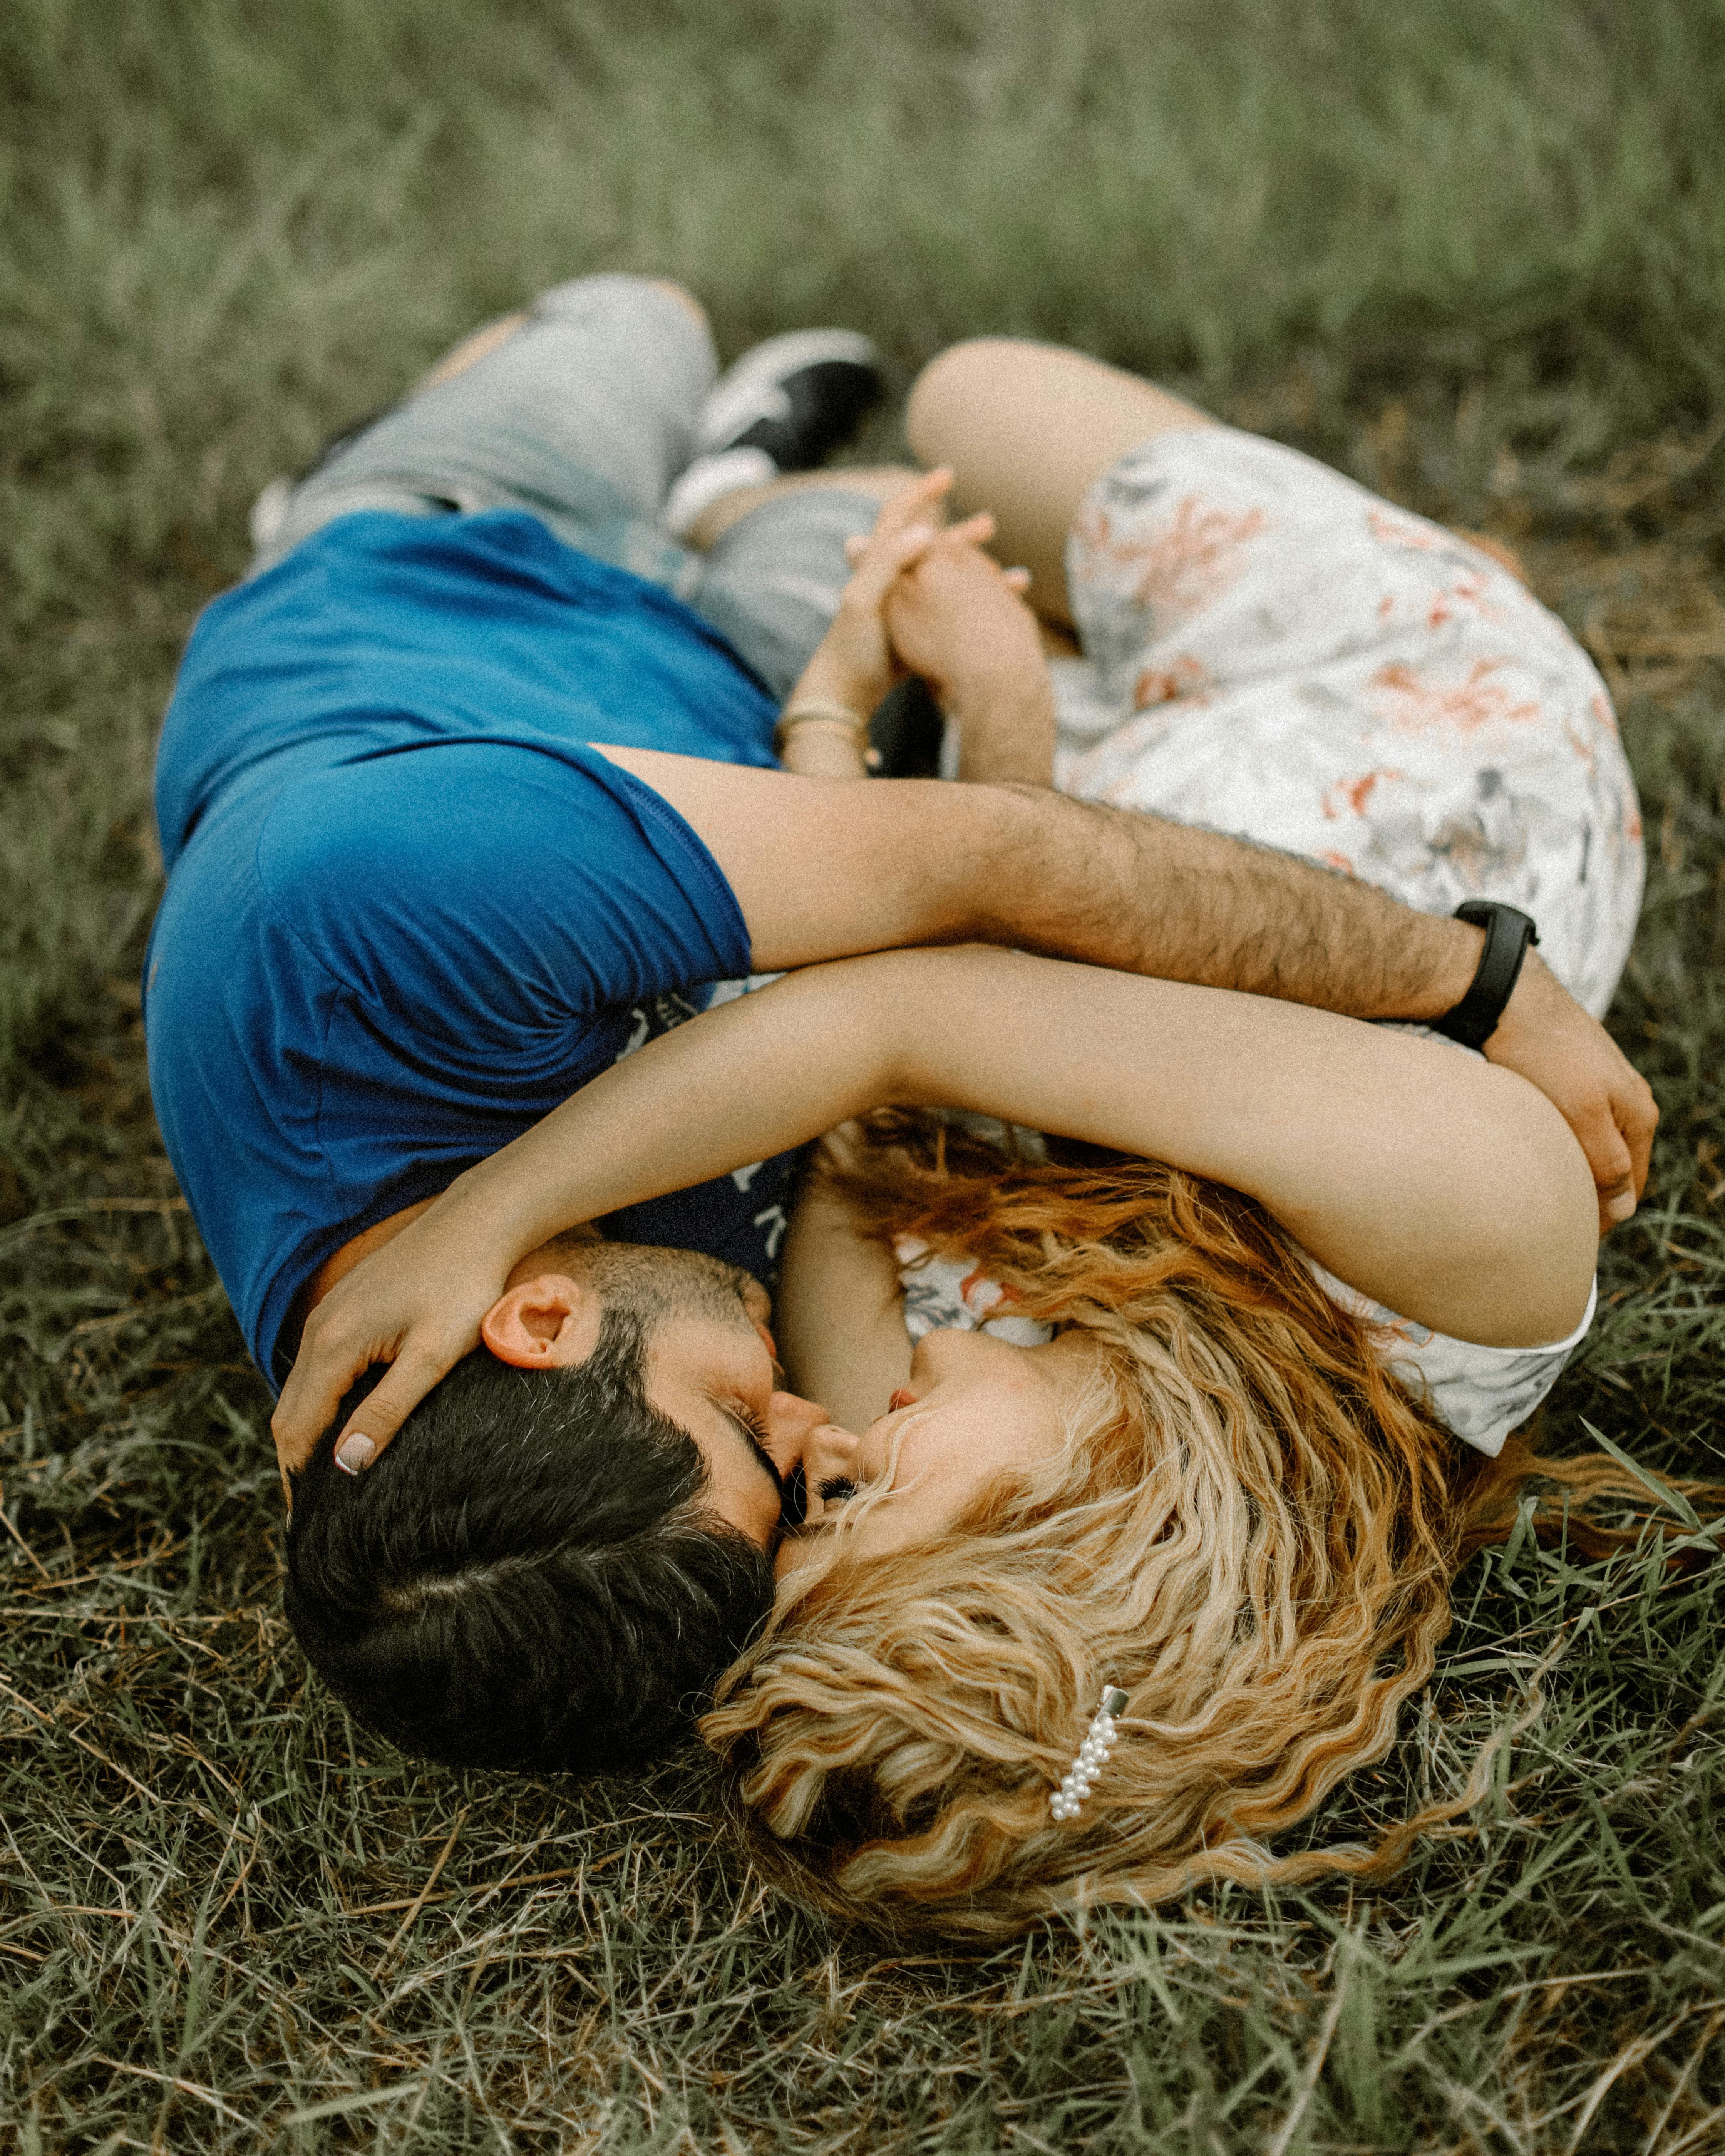 A young couple embracing | Source: Studio Negarin on Pexels